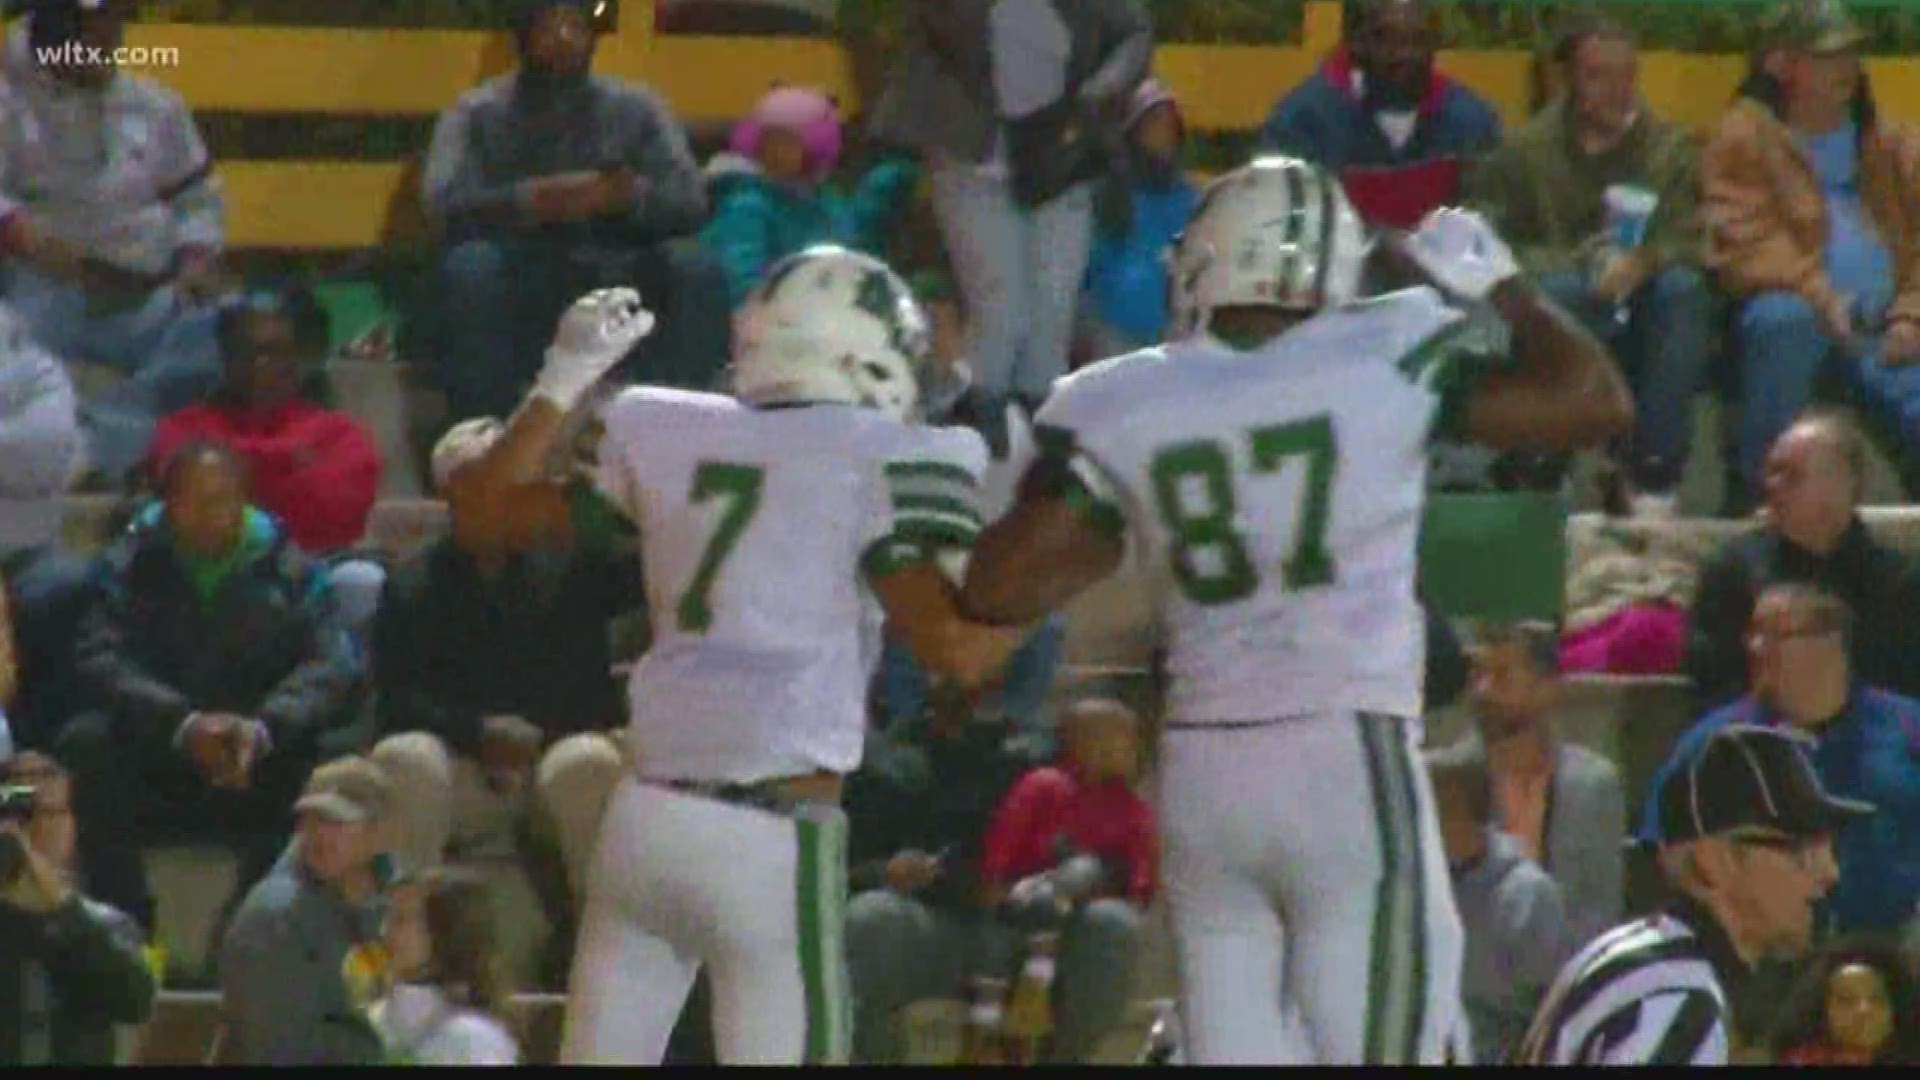 In the Class 5A Lower State championship, Dutch Fork wins at Summerville 47-14. The Silver Foxes face T.L. Hanna next week for the 5A state title.